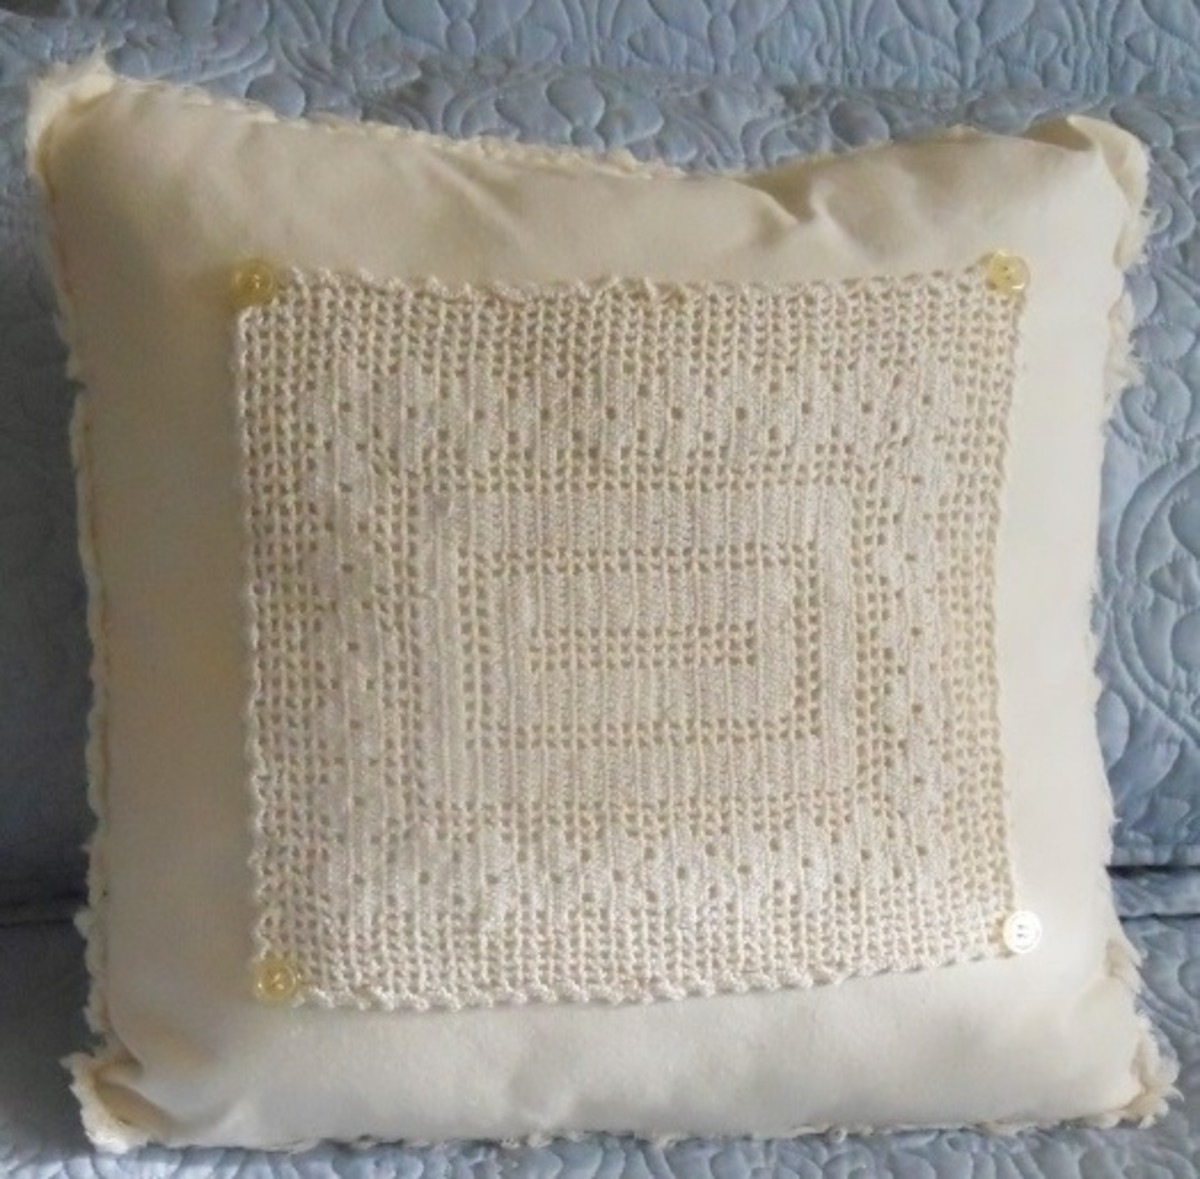 How to Make Throw Pillows From Dinner Napkins